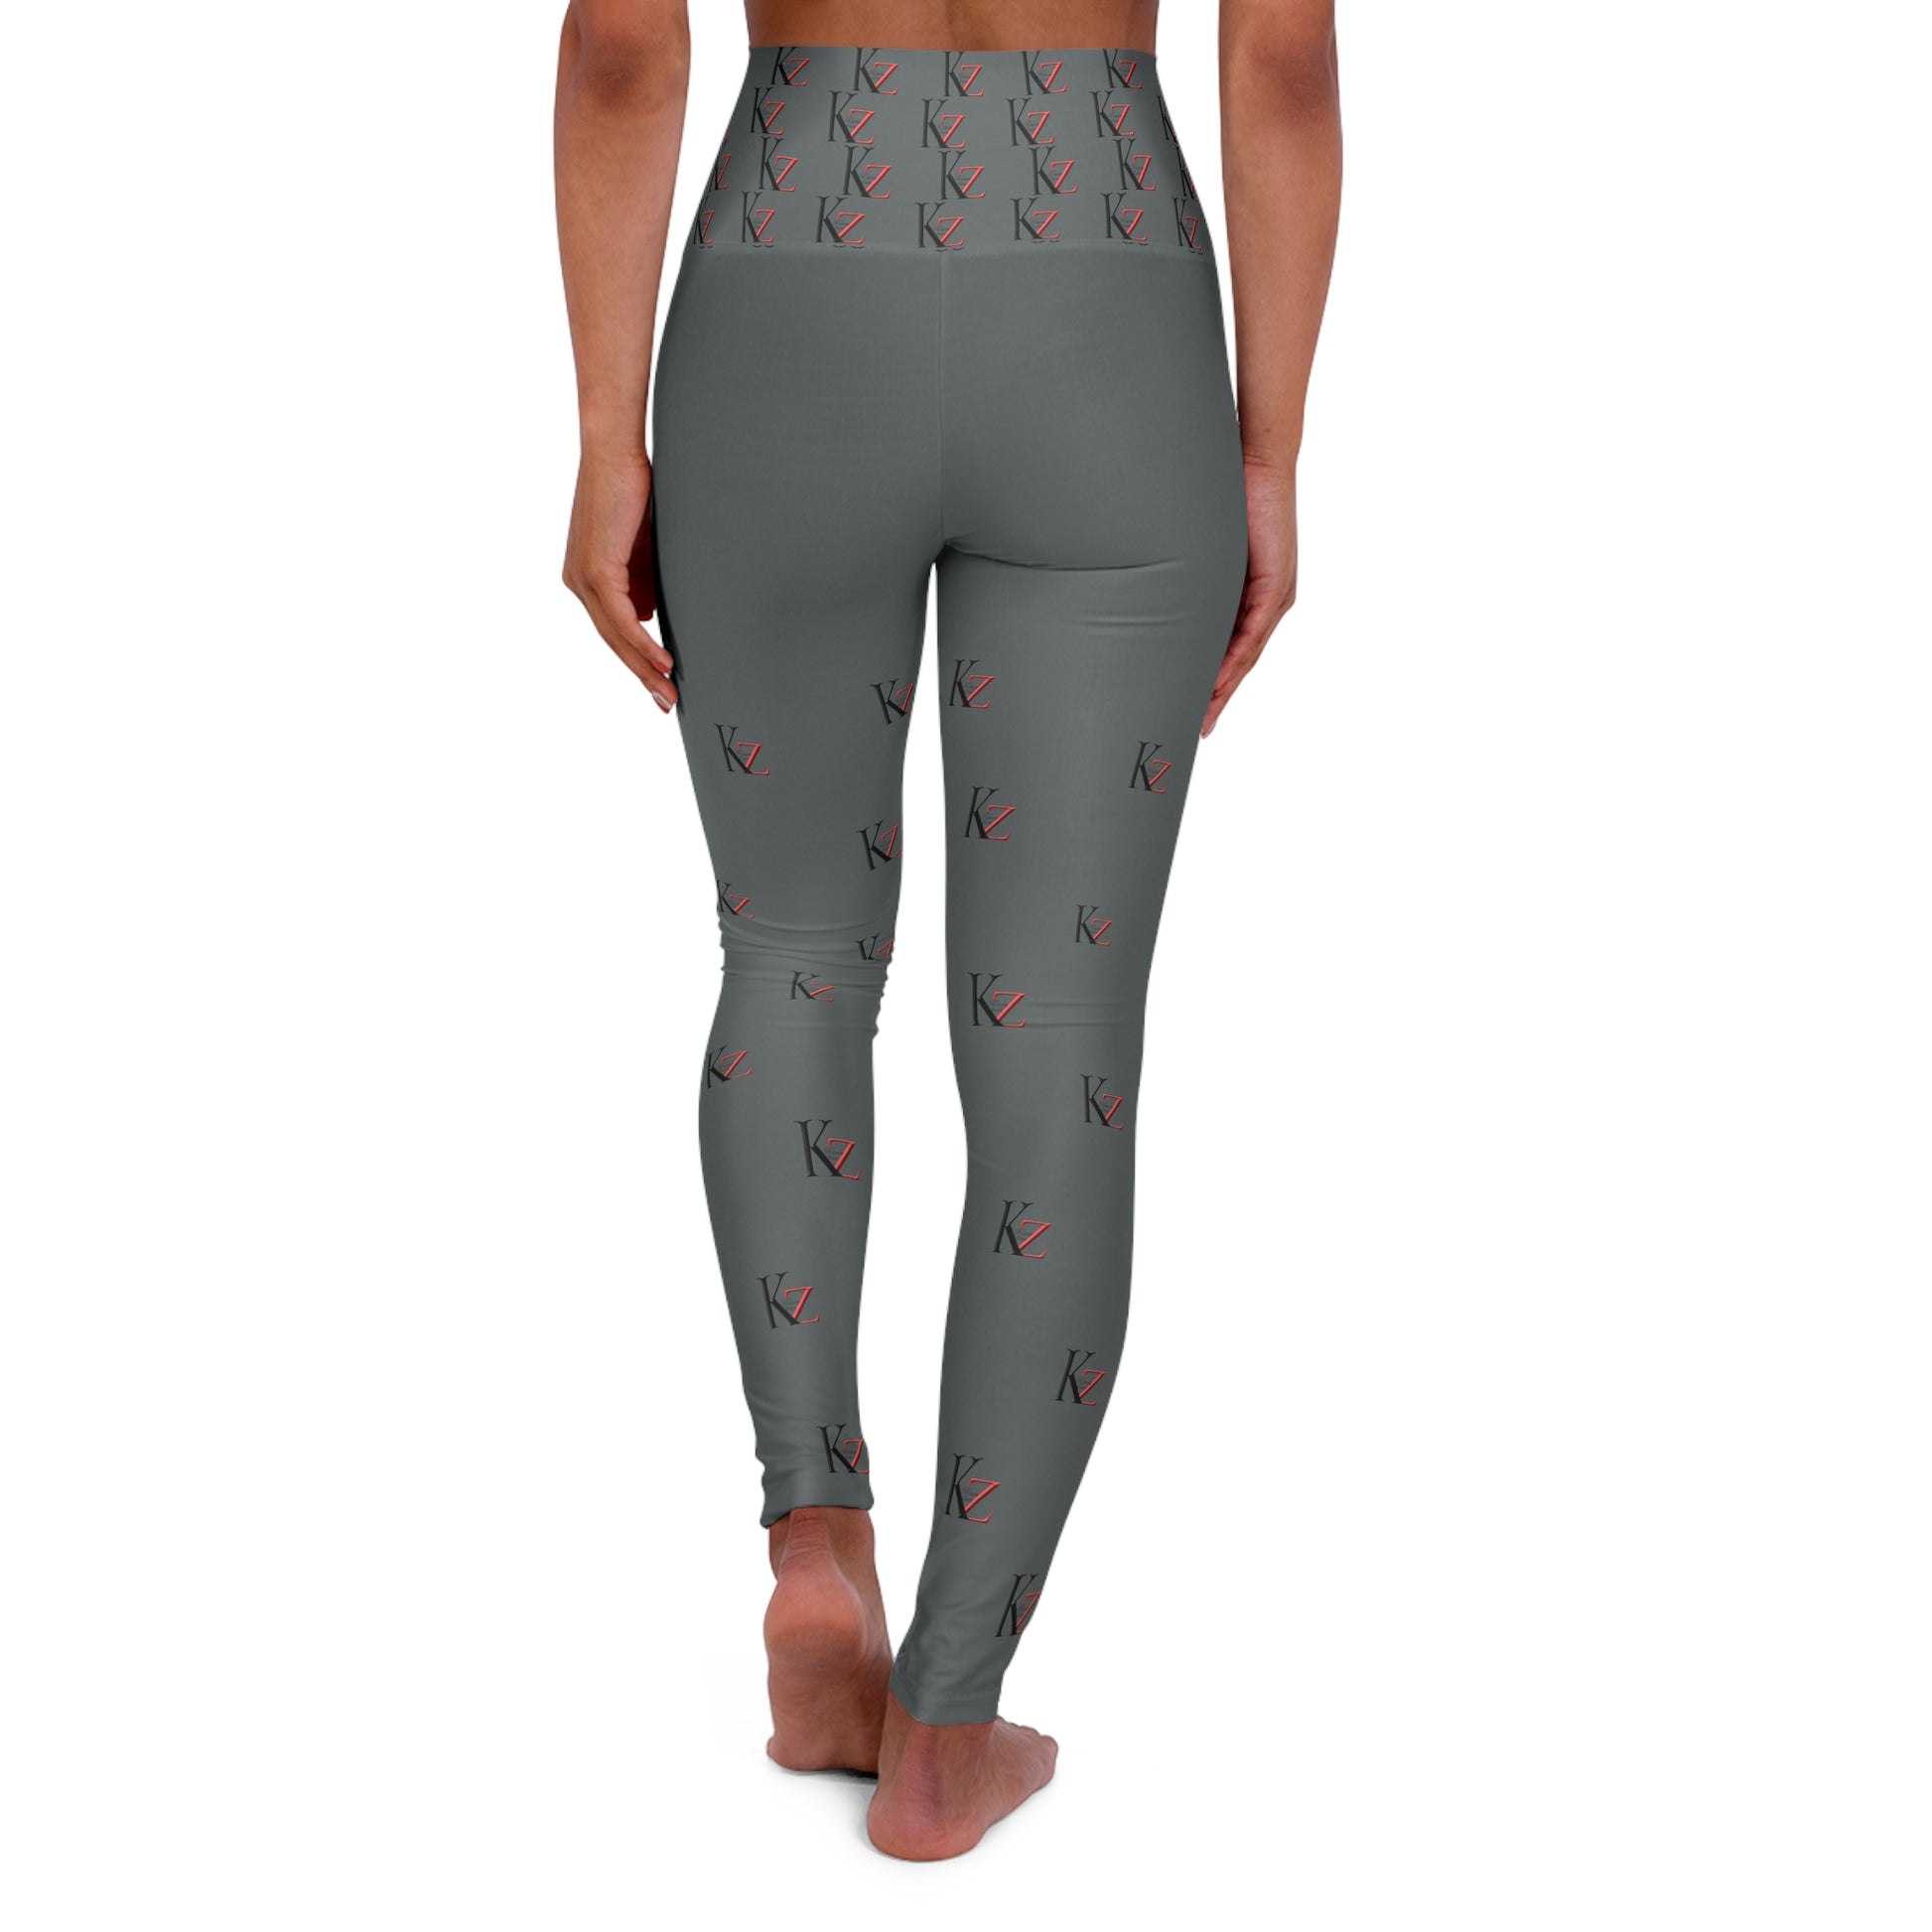 High Waisted KZ monogram Leggings (Dark Gray-Crome) For an optimal fit, check out the KZ monogram Leggings. Crafted with stretchy fabric, these leggings feature a high-waisted and slim fit. Plus, the iconic Kalent Zaiz logo is featured around the waistband.